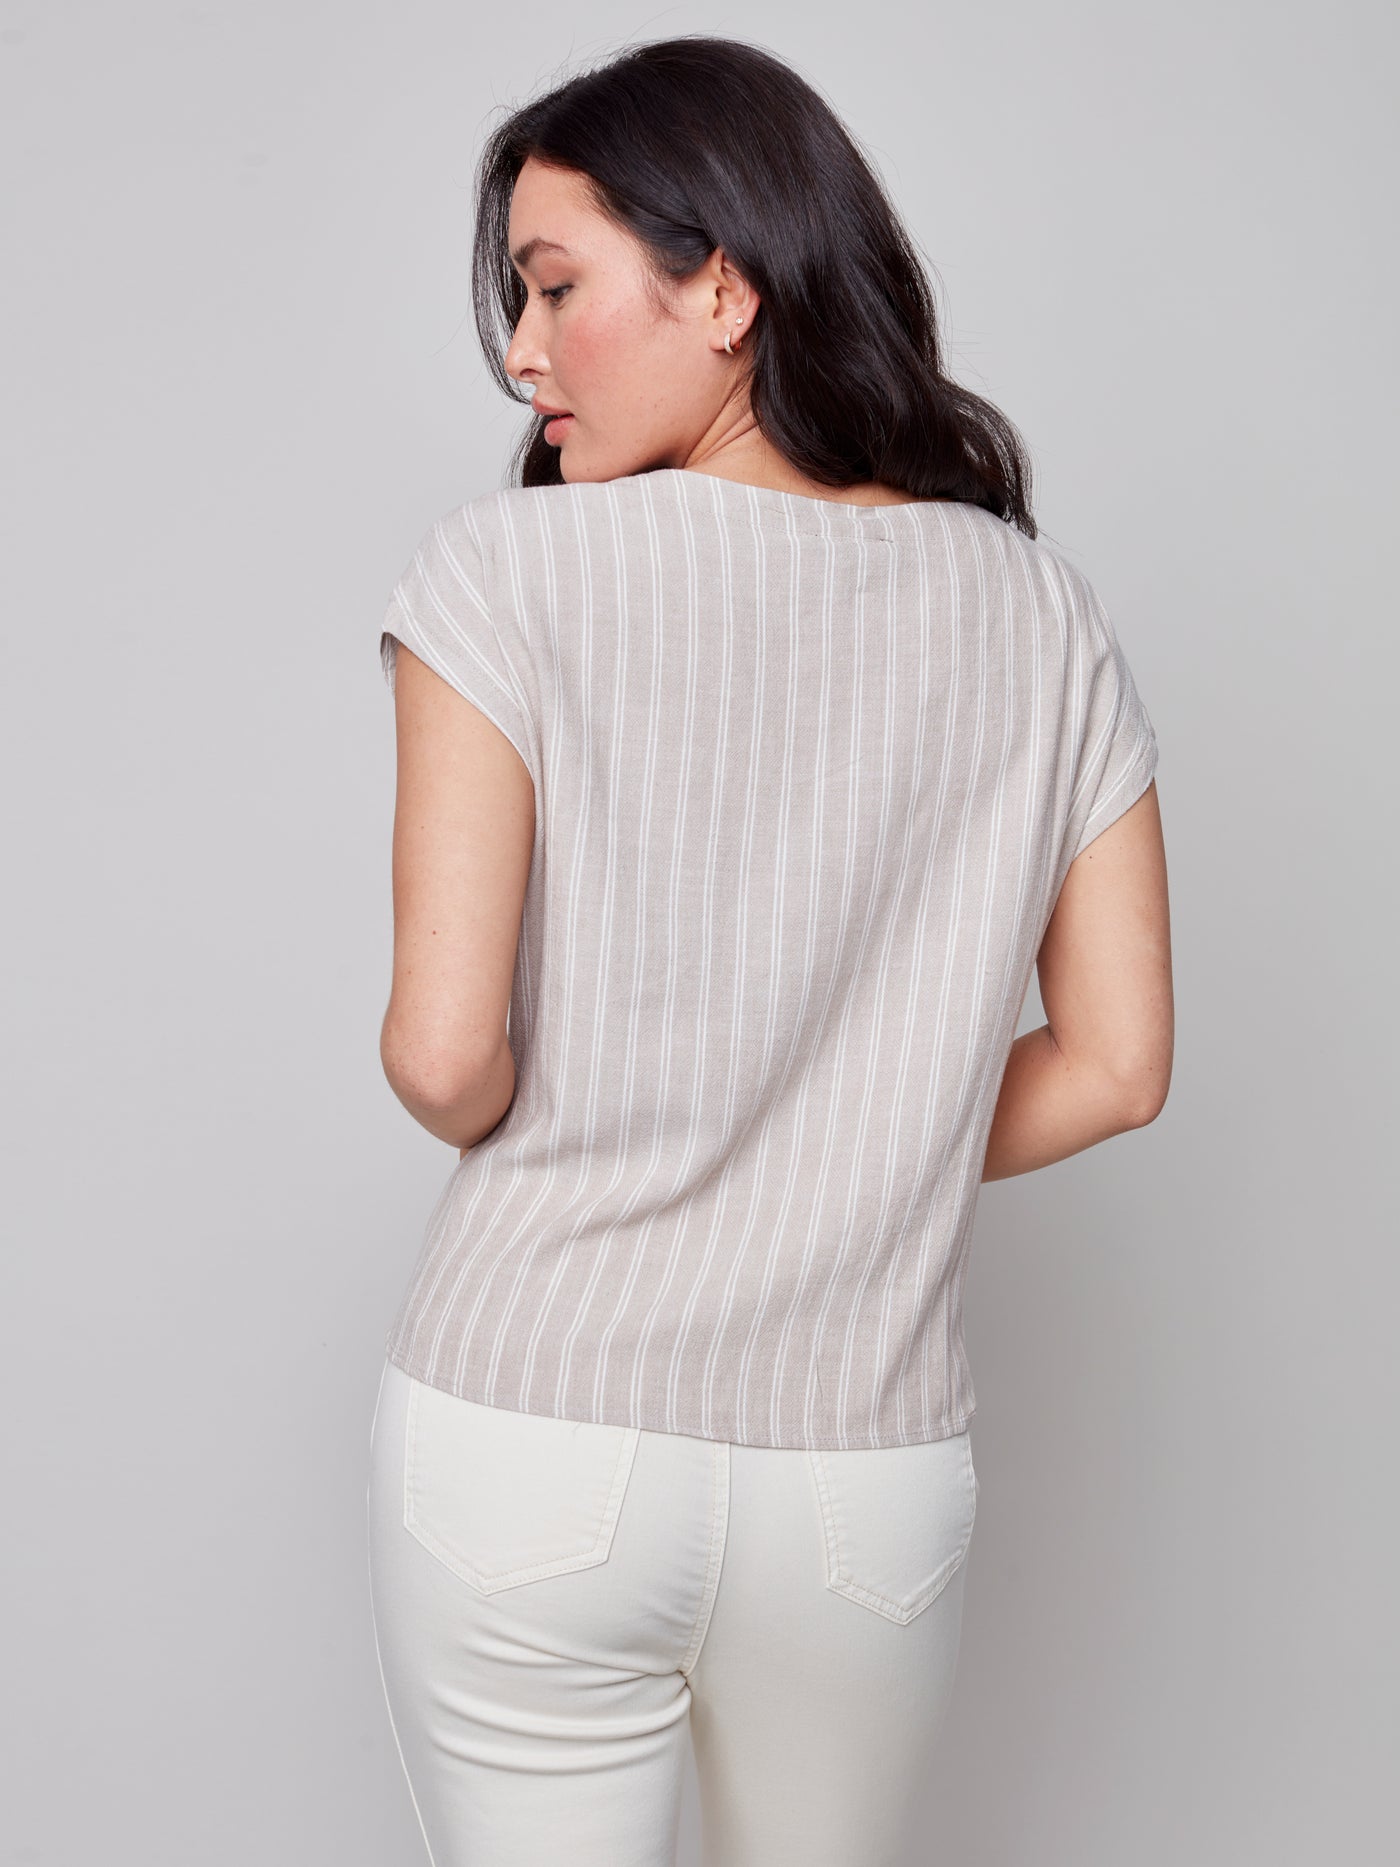 Charlie B Top - Front Tie Stripe - Natural